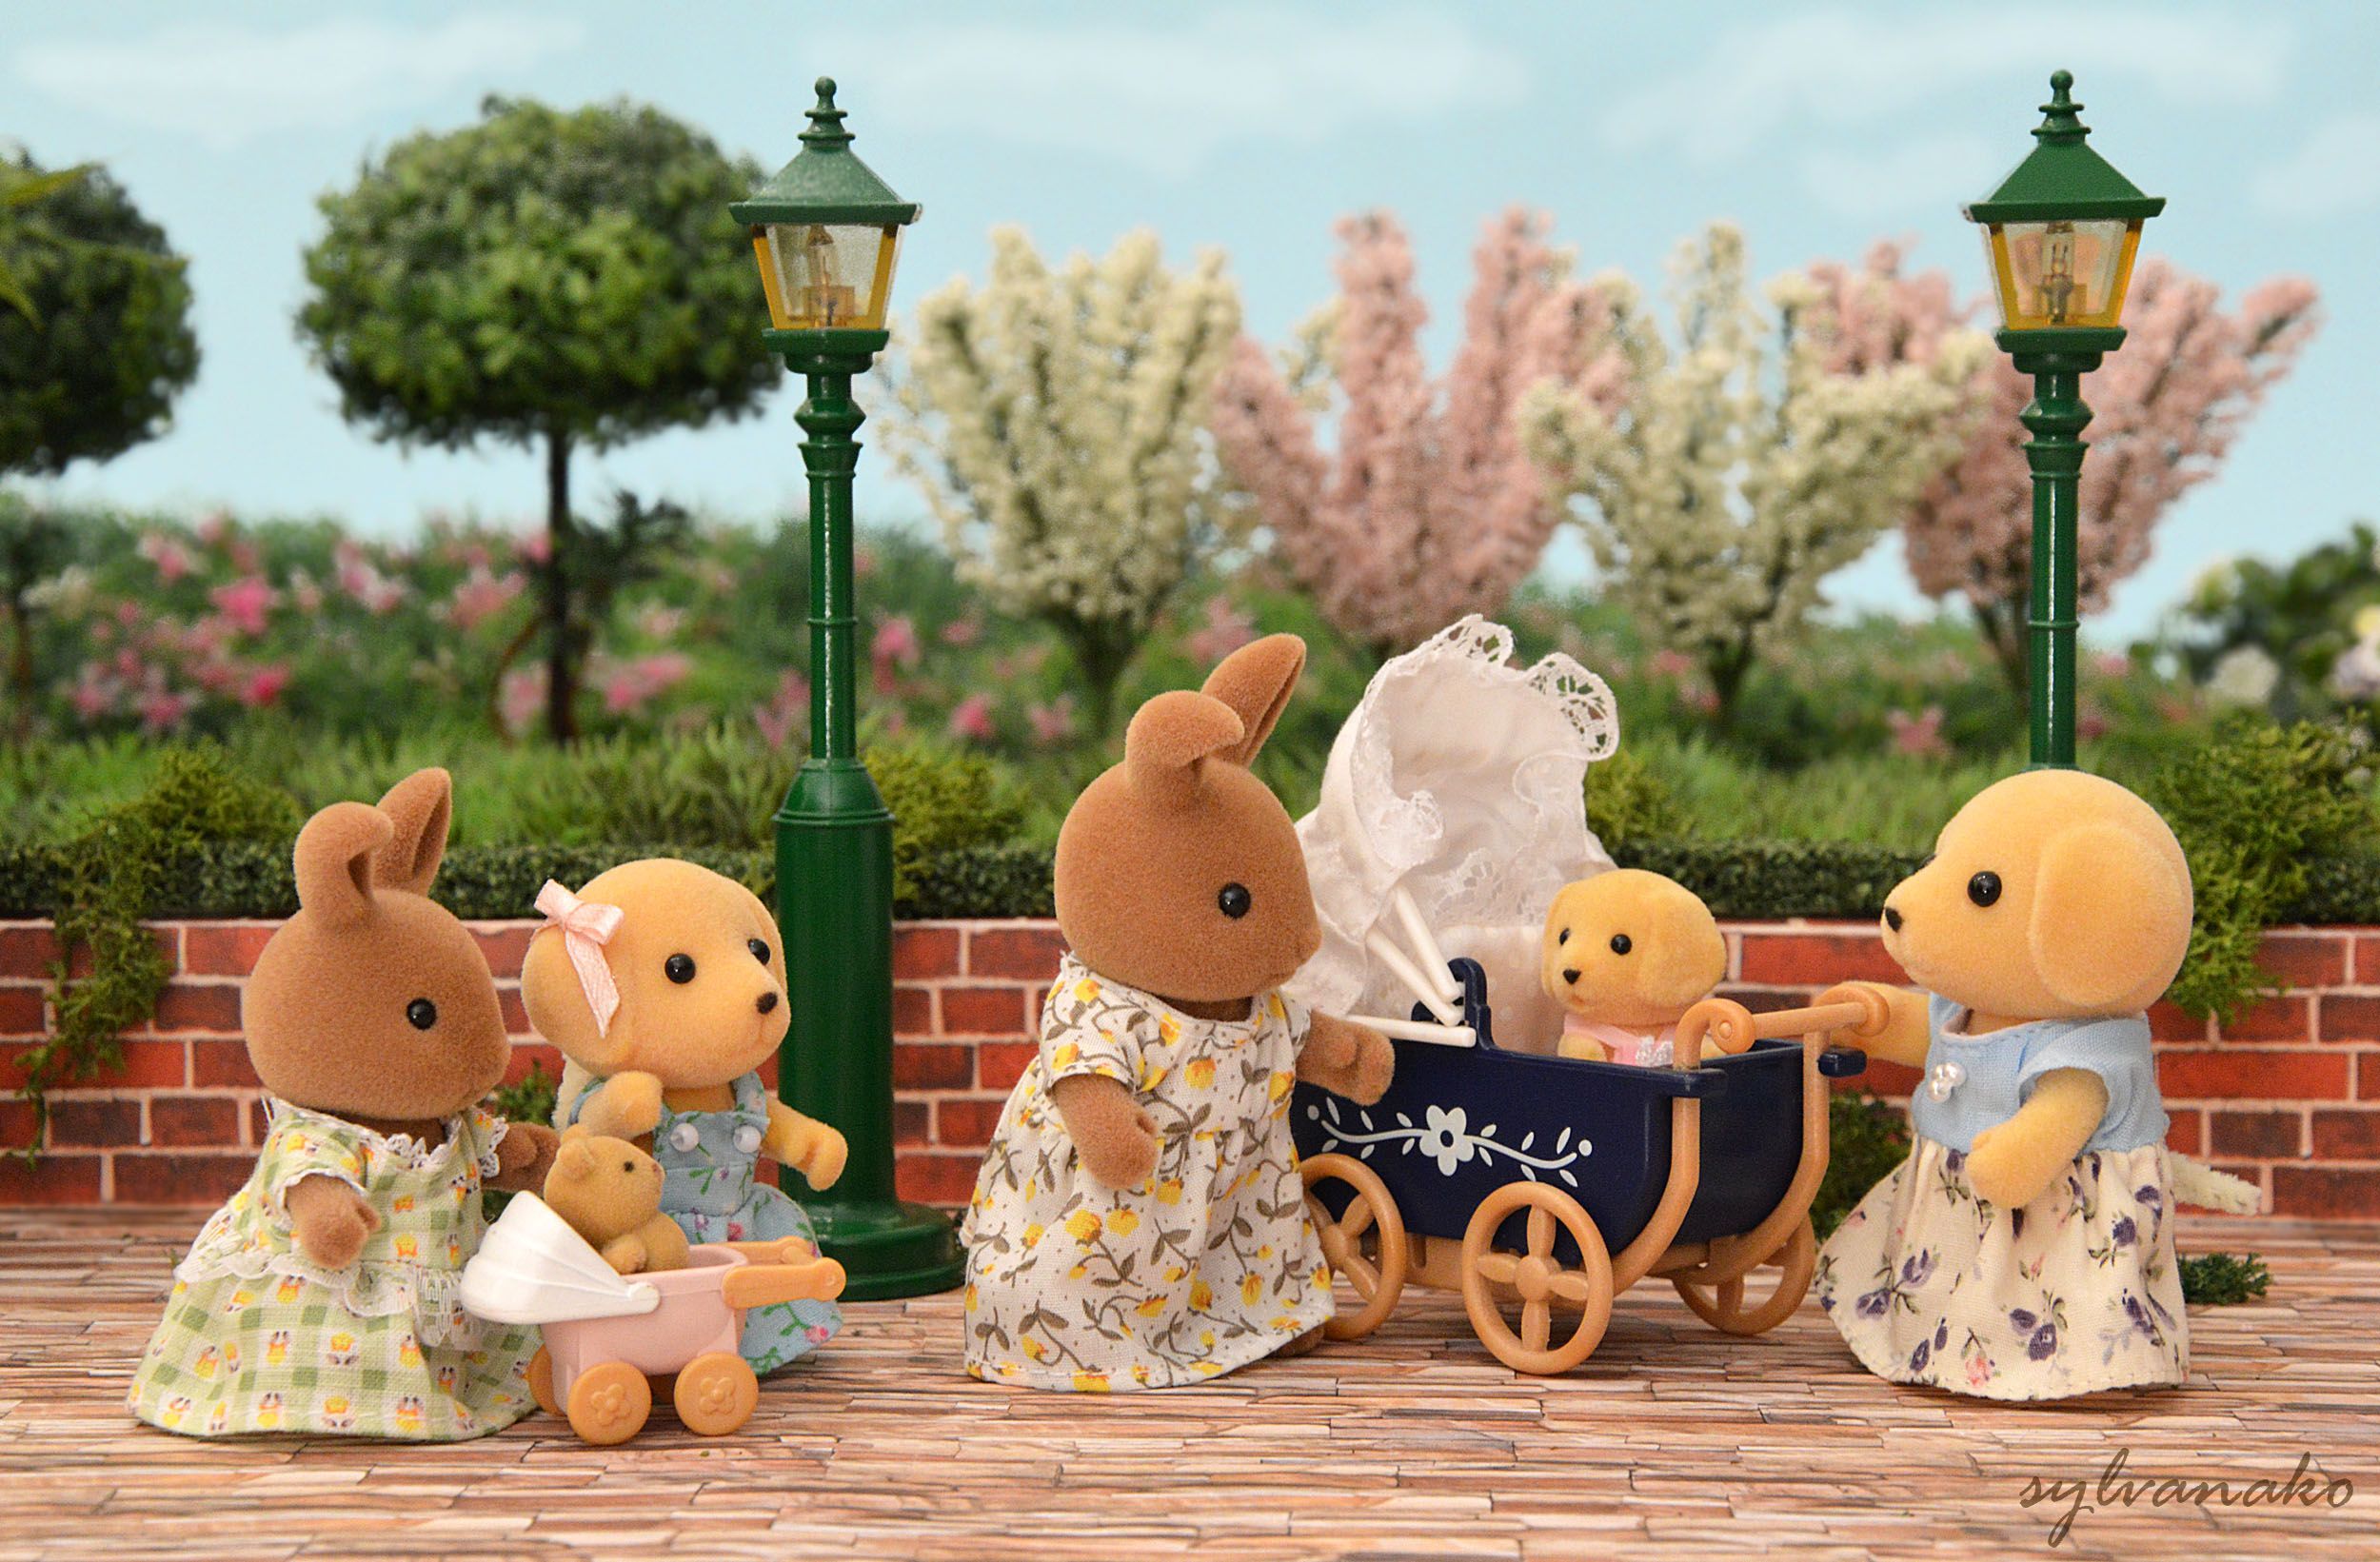 Wallpaper, park, flowers, trees, girls, baby, cute, animal, playground, yard, garden, toys, miniature, dress, sweet, families, calico, critters, rabbits, sylvanianfamilies, sylvanian, calicocritters 2500x1641